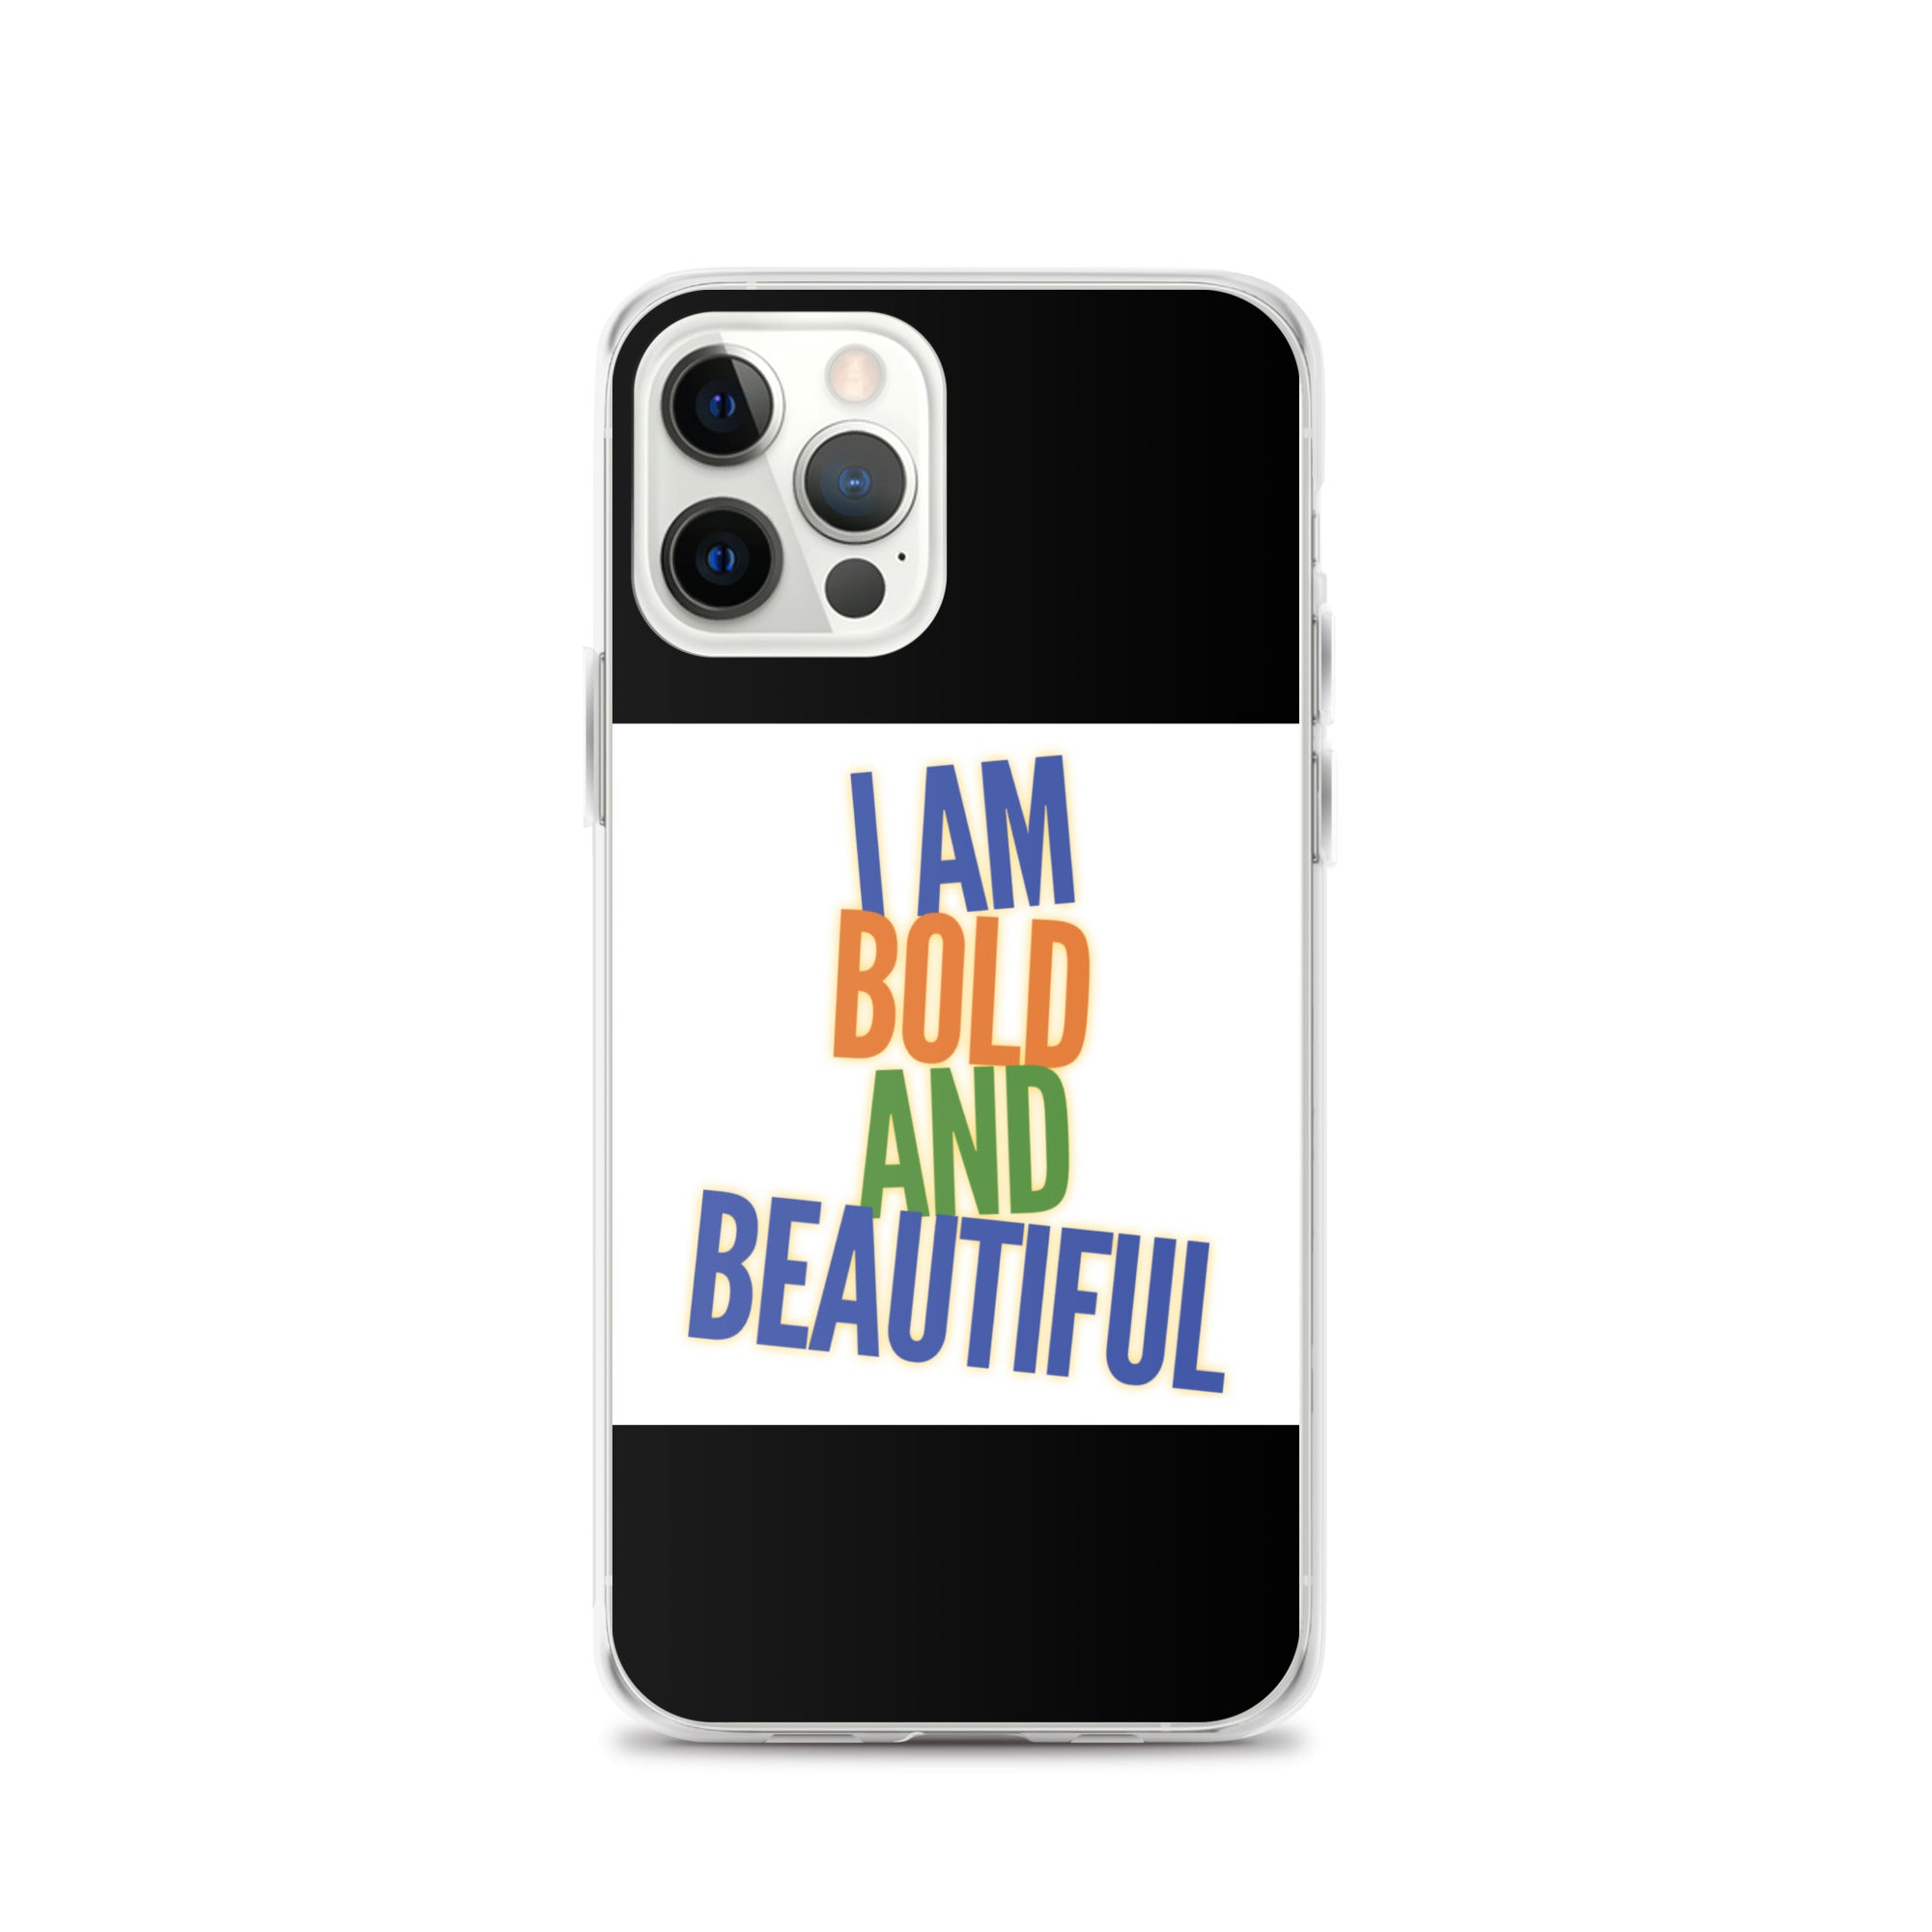 GloWell Designs - iPhone Case - Affirmation Quote - I Am Bold and Beautiful - GloWell Designs